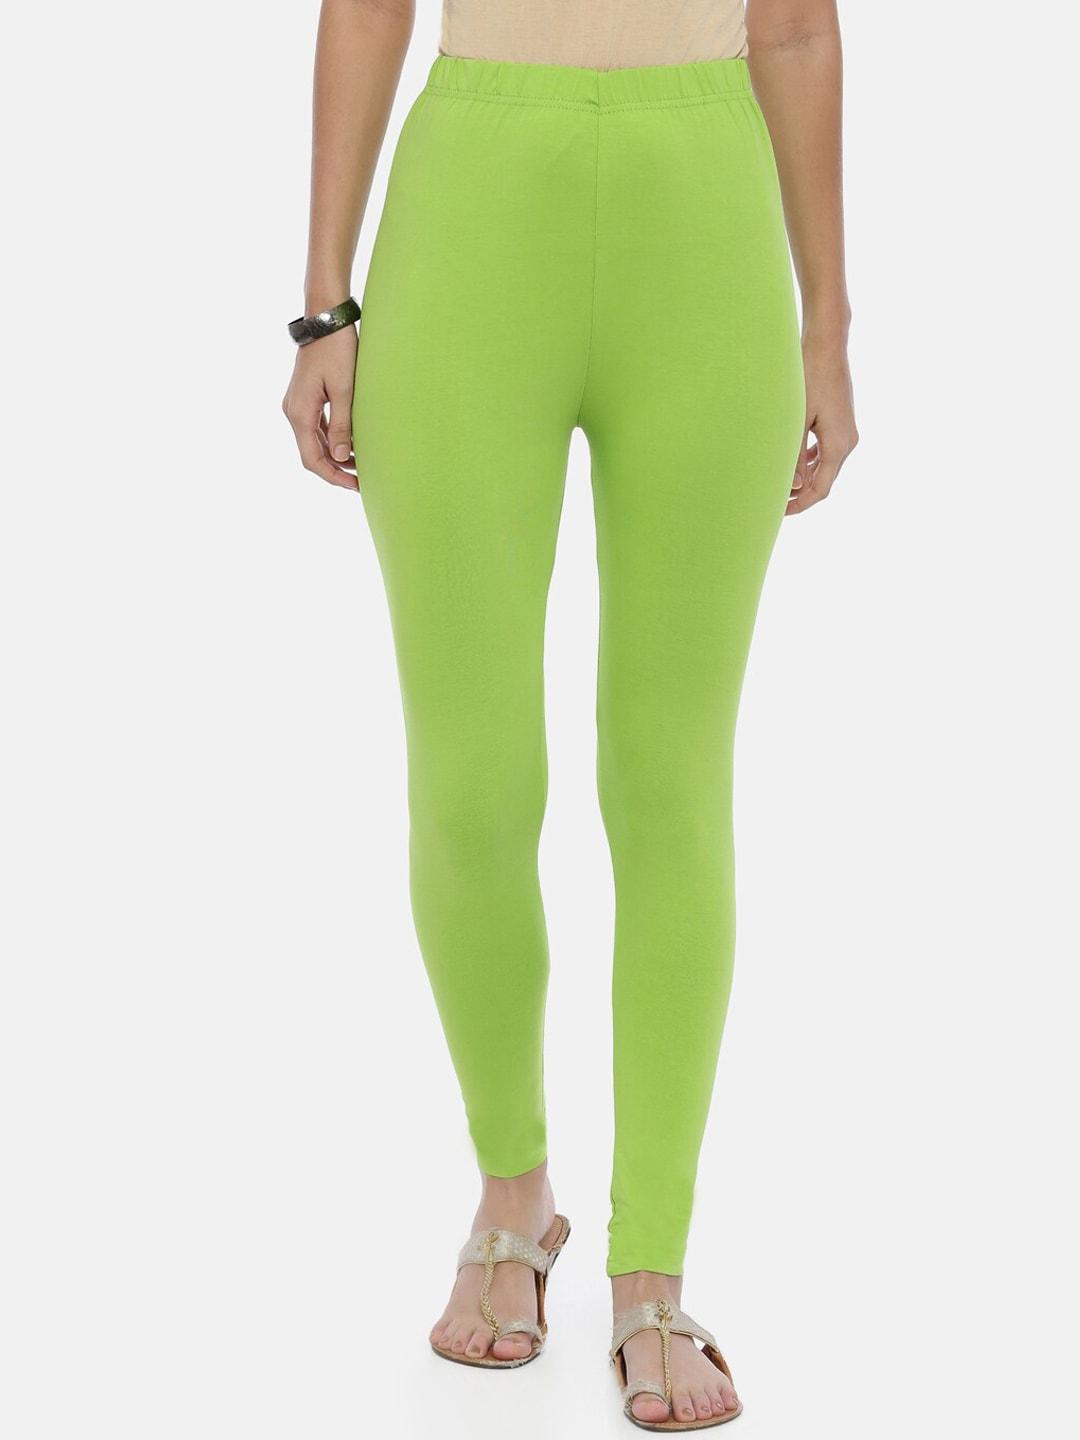 souchii women lime green solid ankle-length leggings